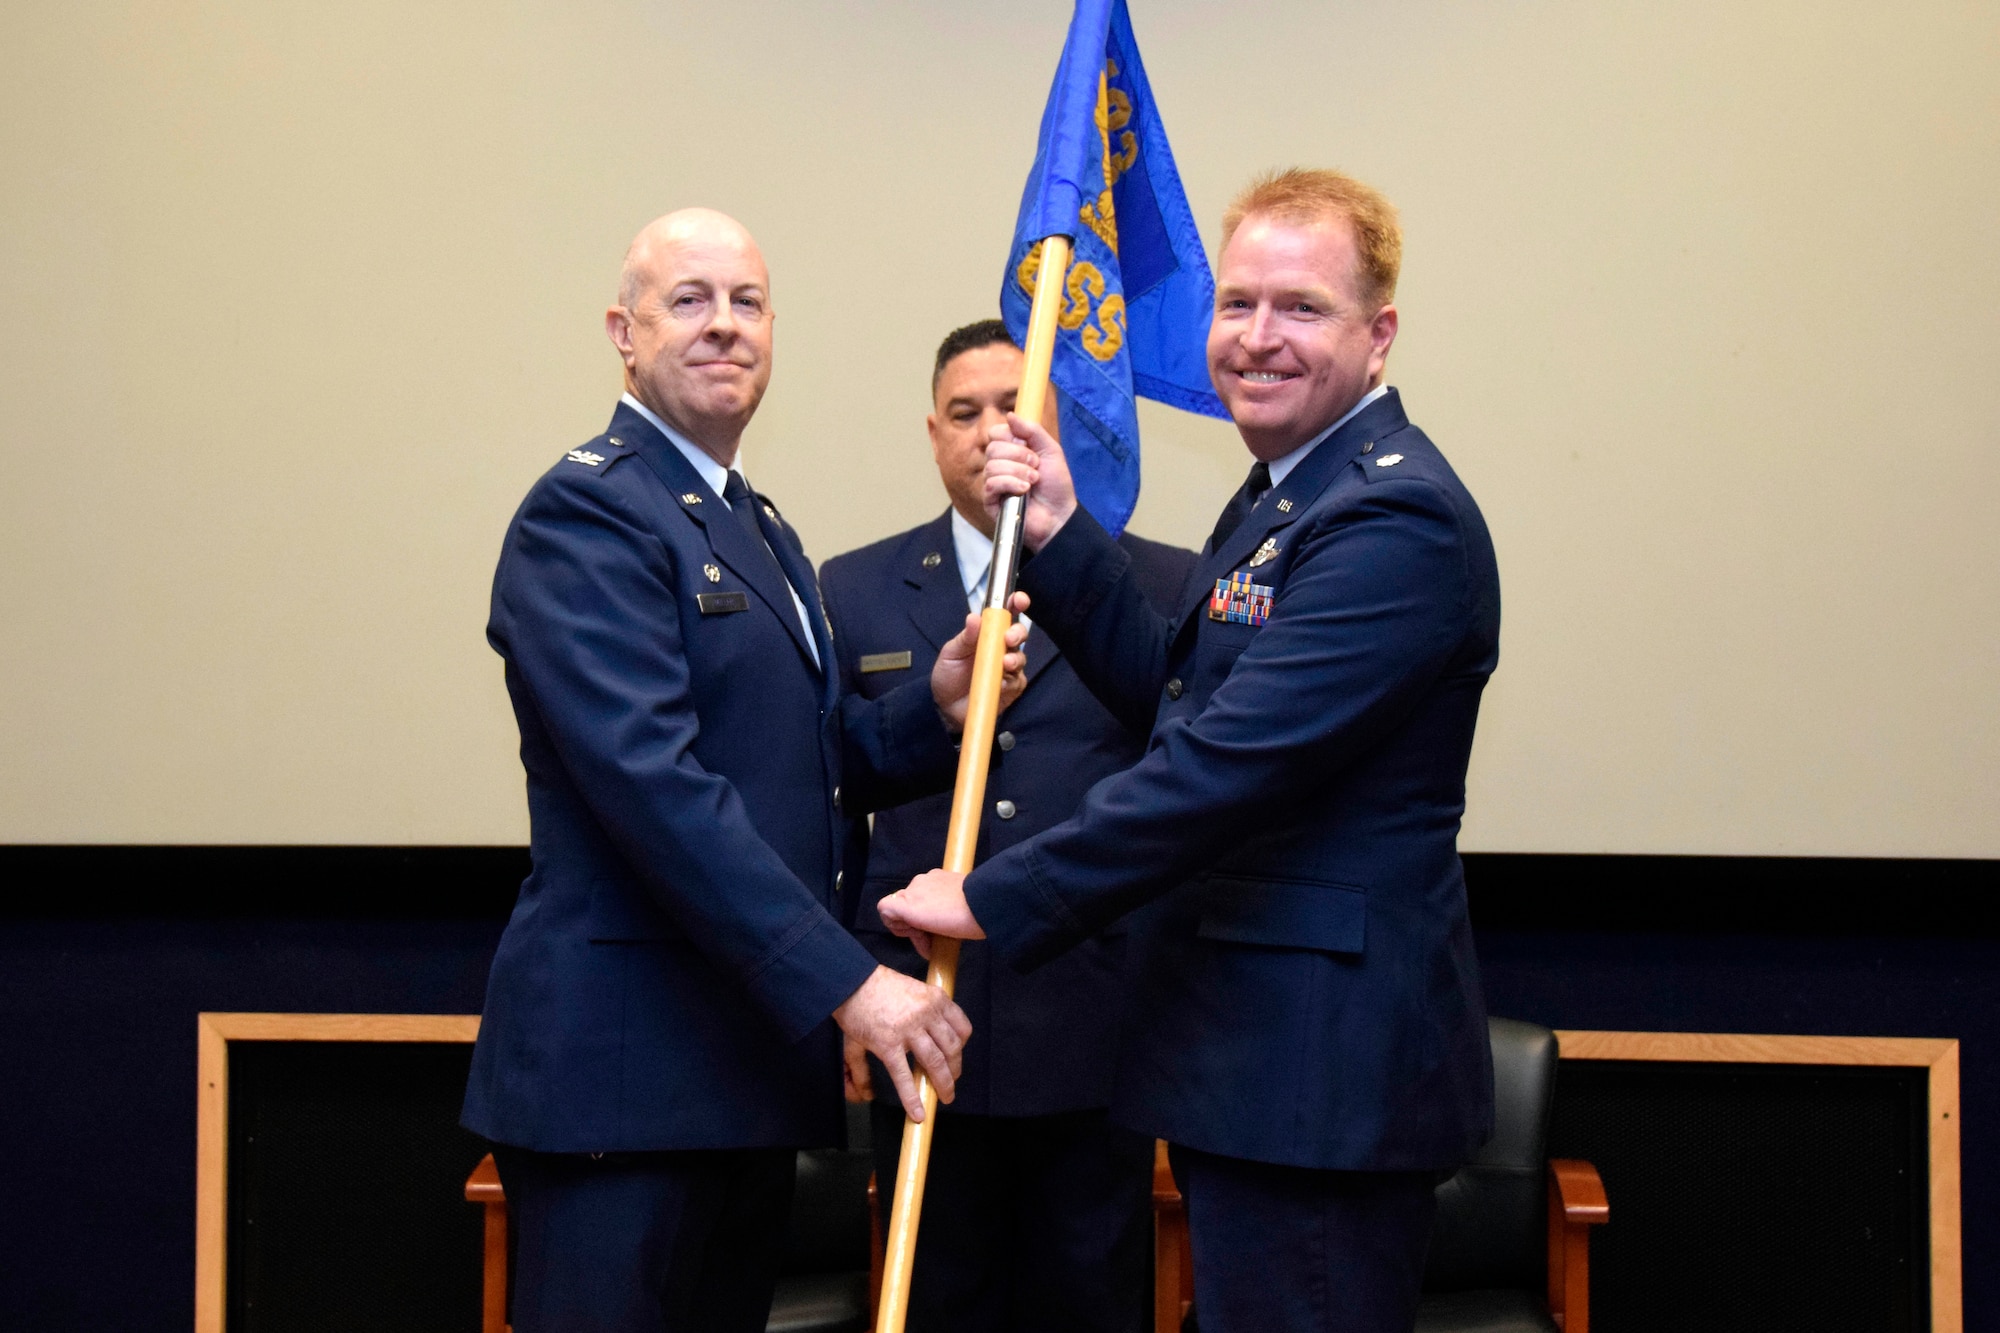 Lt. Col. Jonathan R. Behunin (right), accepts the guidon from Col. James C. “JC” Miller, 433rd Operations Group commander, during an assumption of command ceremony for the 433rd Operations Support Squadron at Joint Base San Antonio-Lackland, Texas, Sept. 7, 2019.